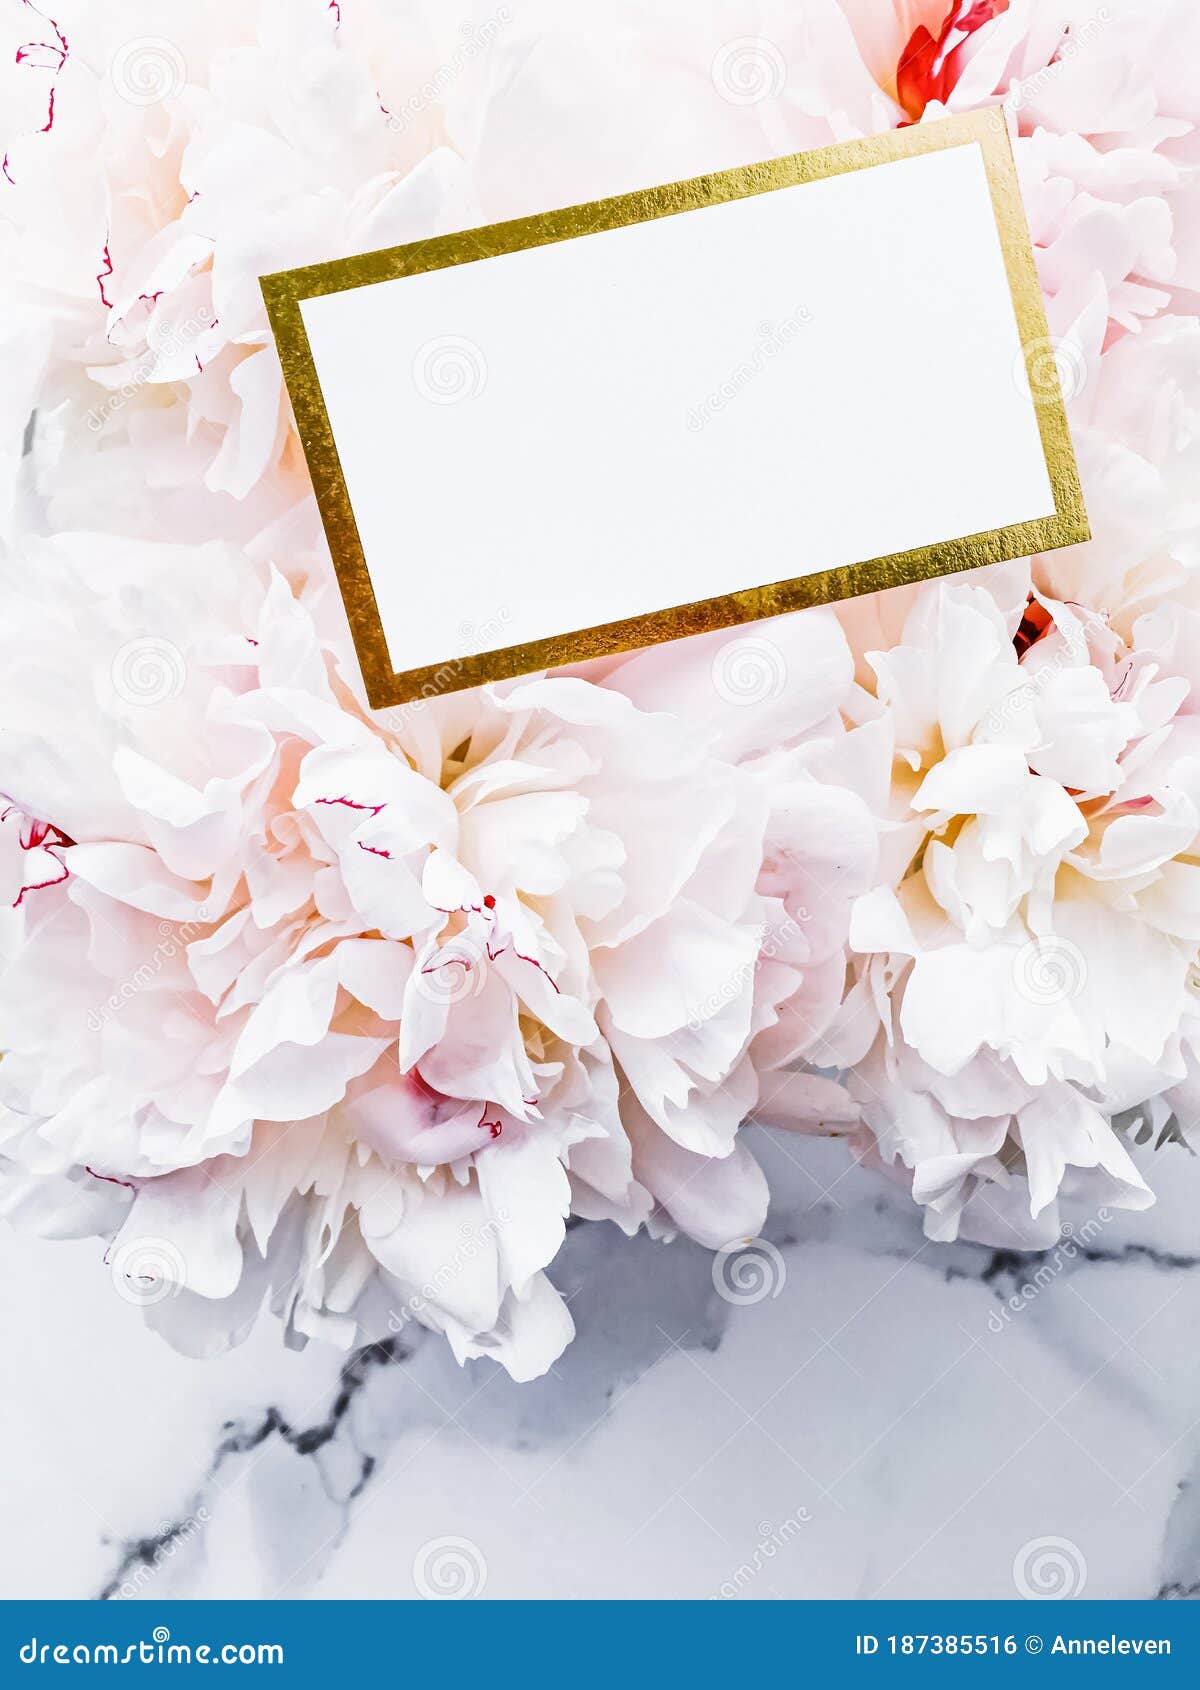 Download Glamorous Business Card Or Invitation Mockup And Bouquet Of Peony Flowers, Wedding And Event ...